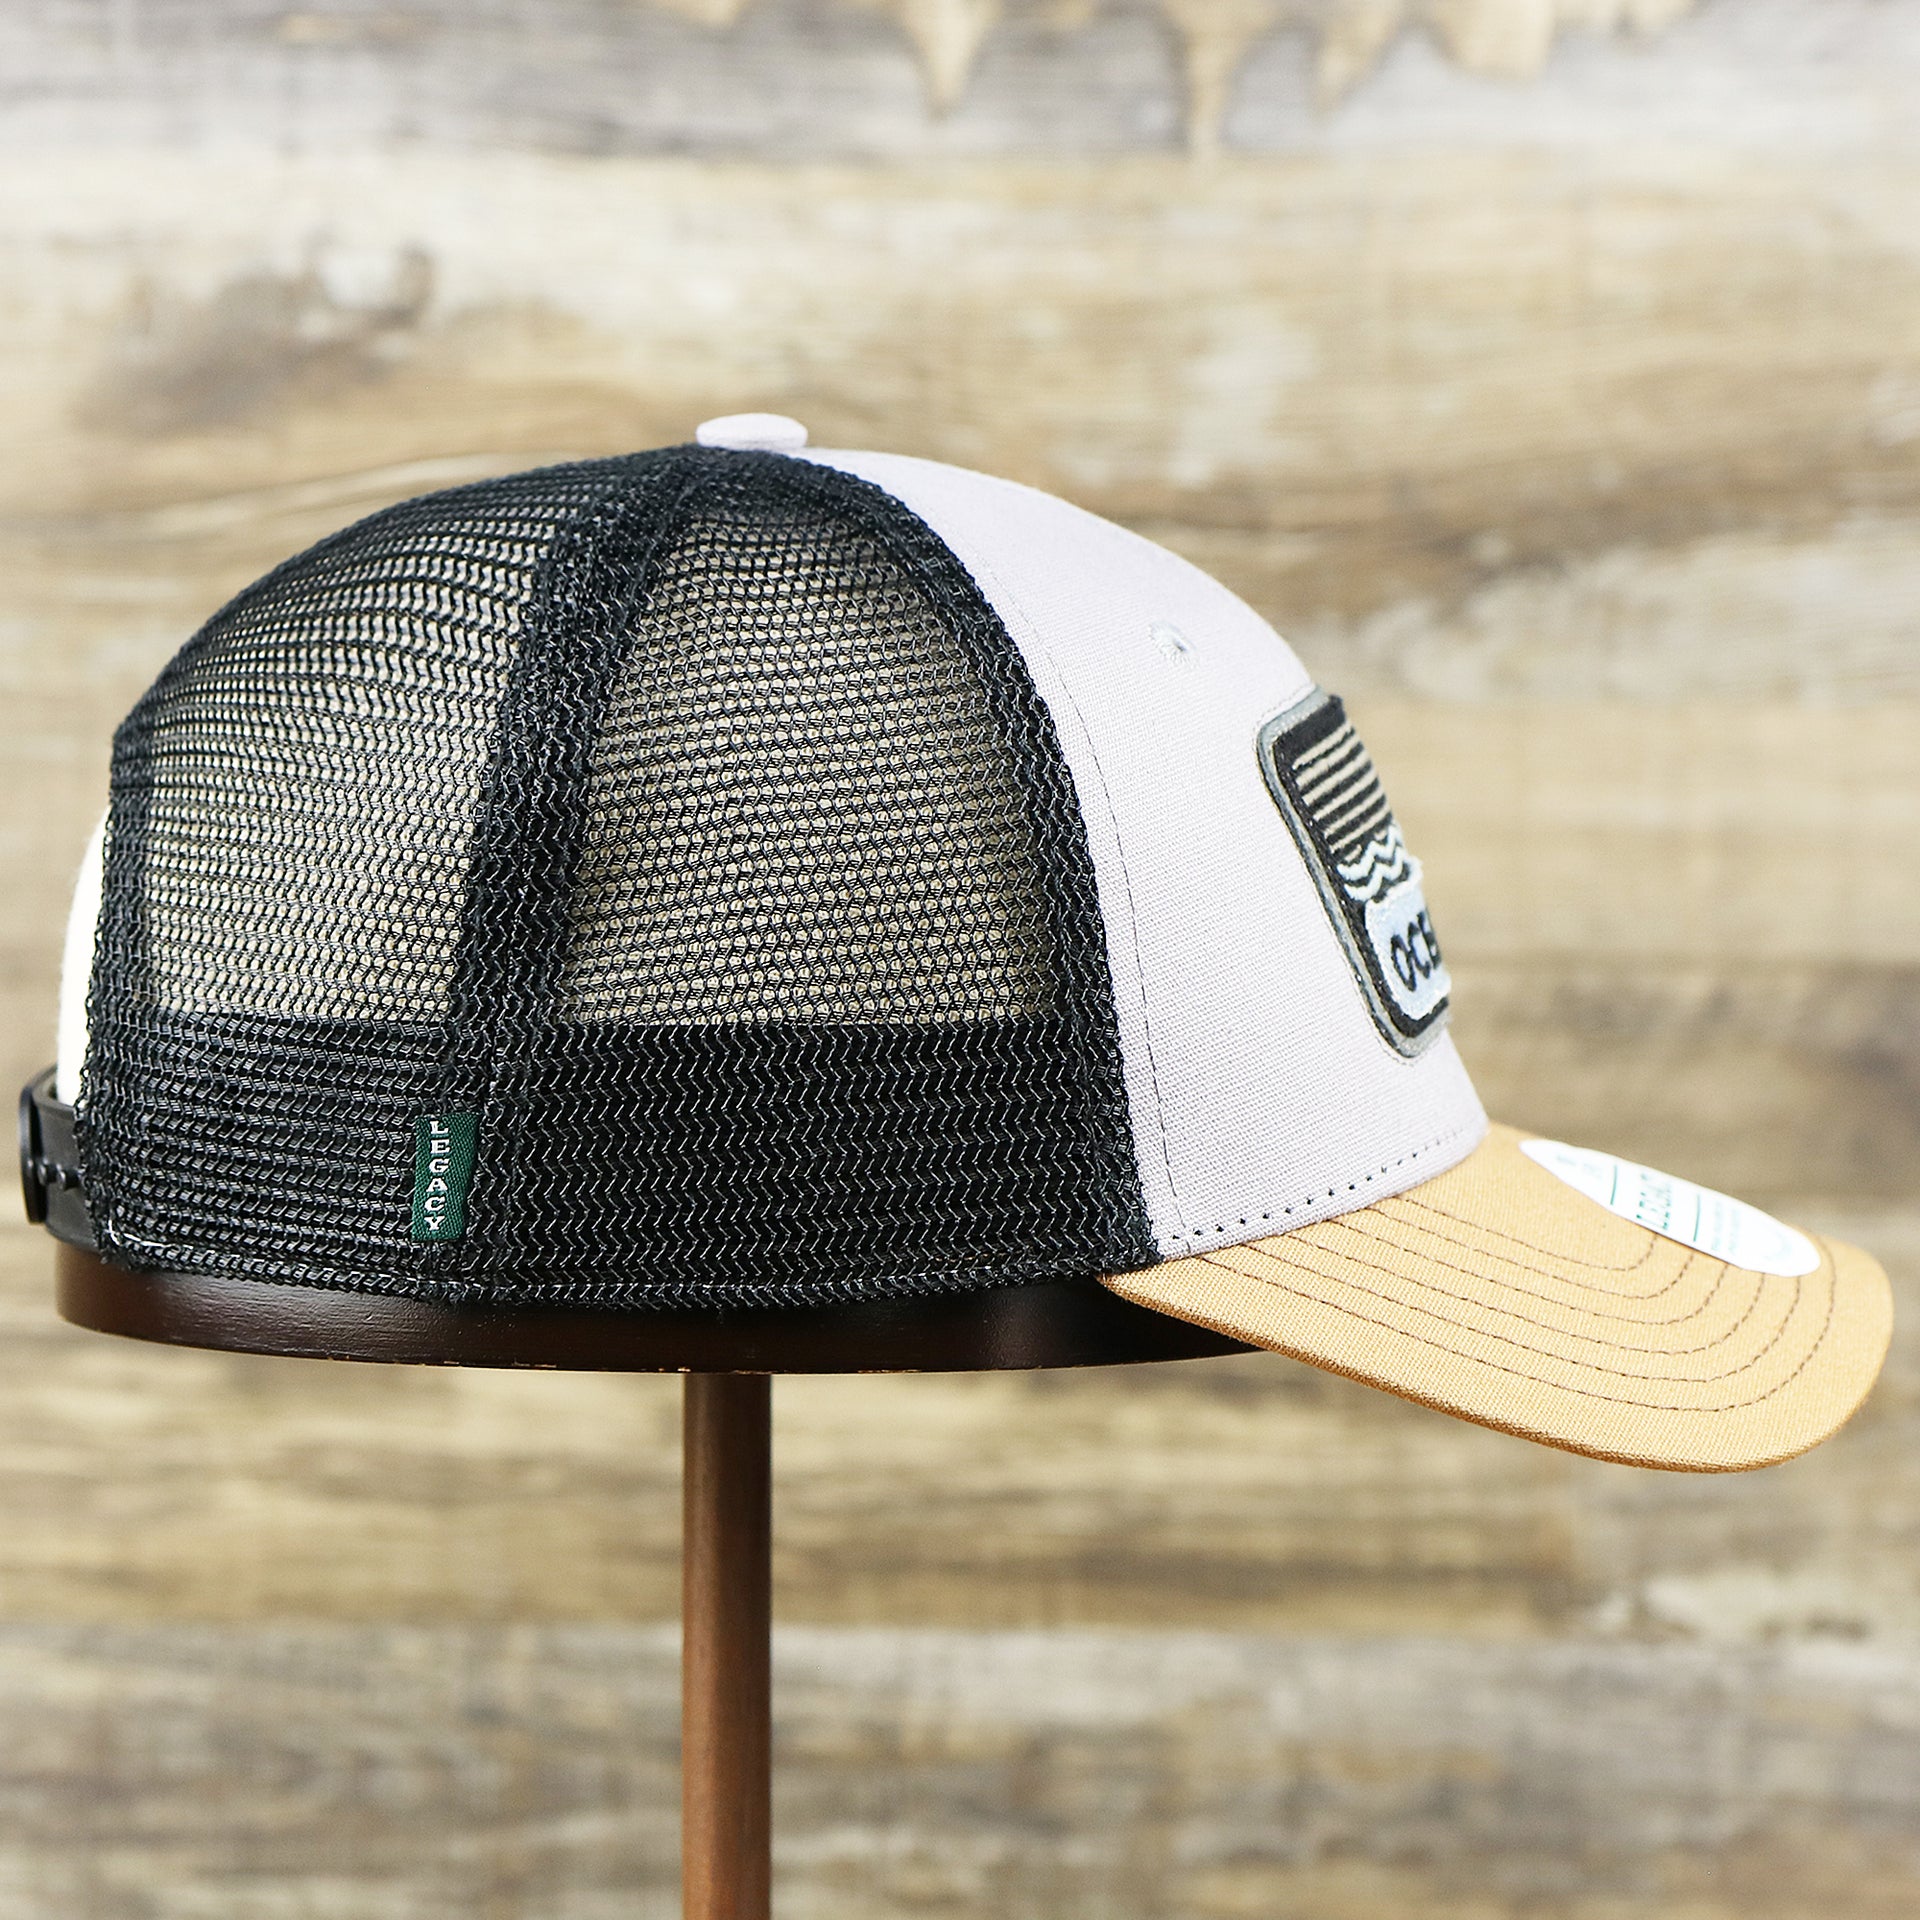 The wearer's right on the Youth New Jersey Ocean City Sunset Mesh Back Trucker Hat | Gray And Black Mesh Youth Trucker Hat